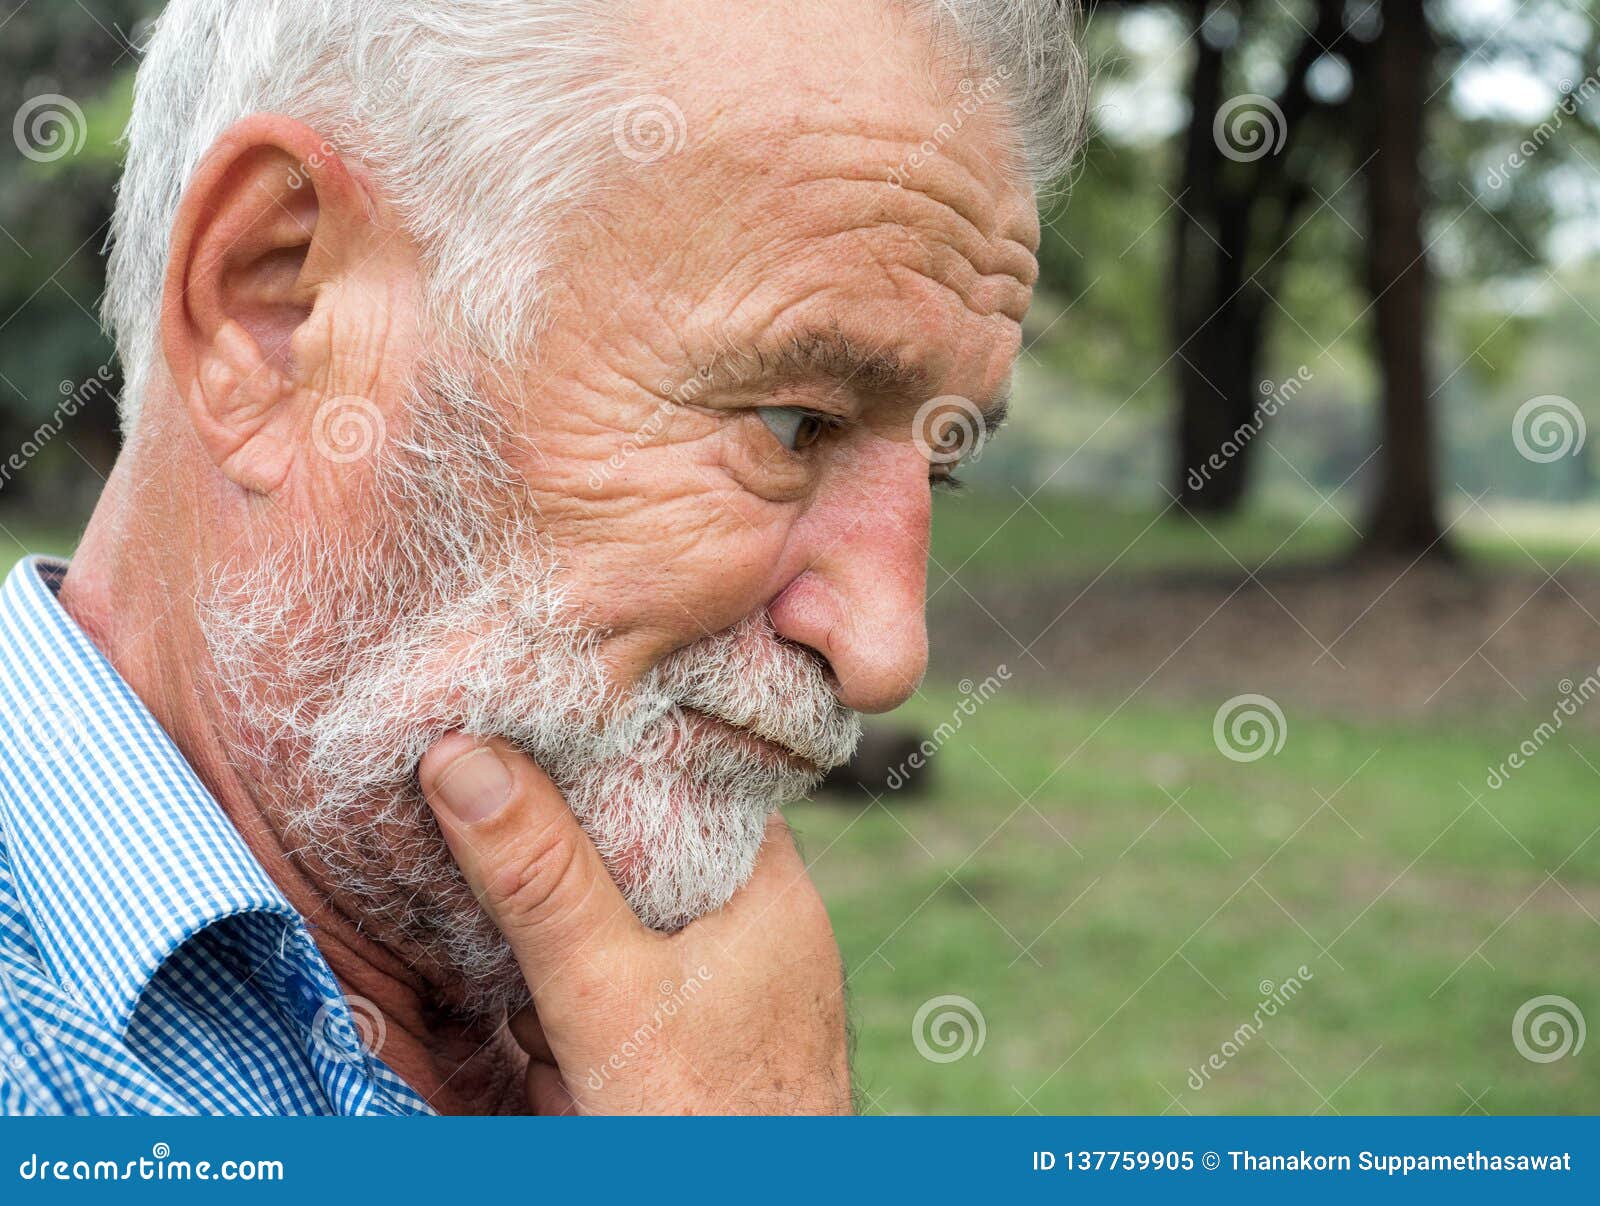 Closeup Portrait Of Old Man Standing Thinking Emotions And Feelings